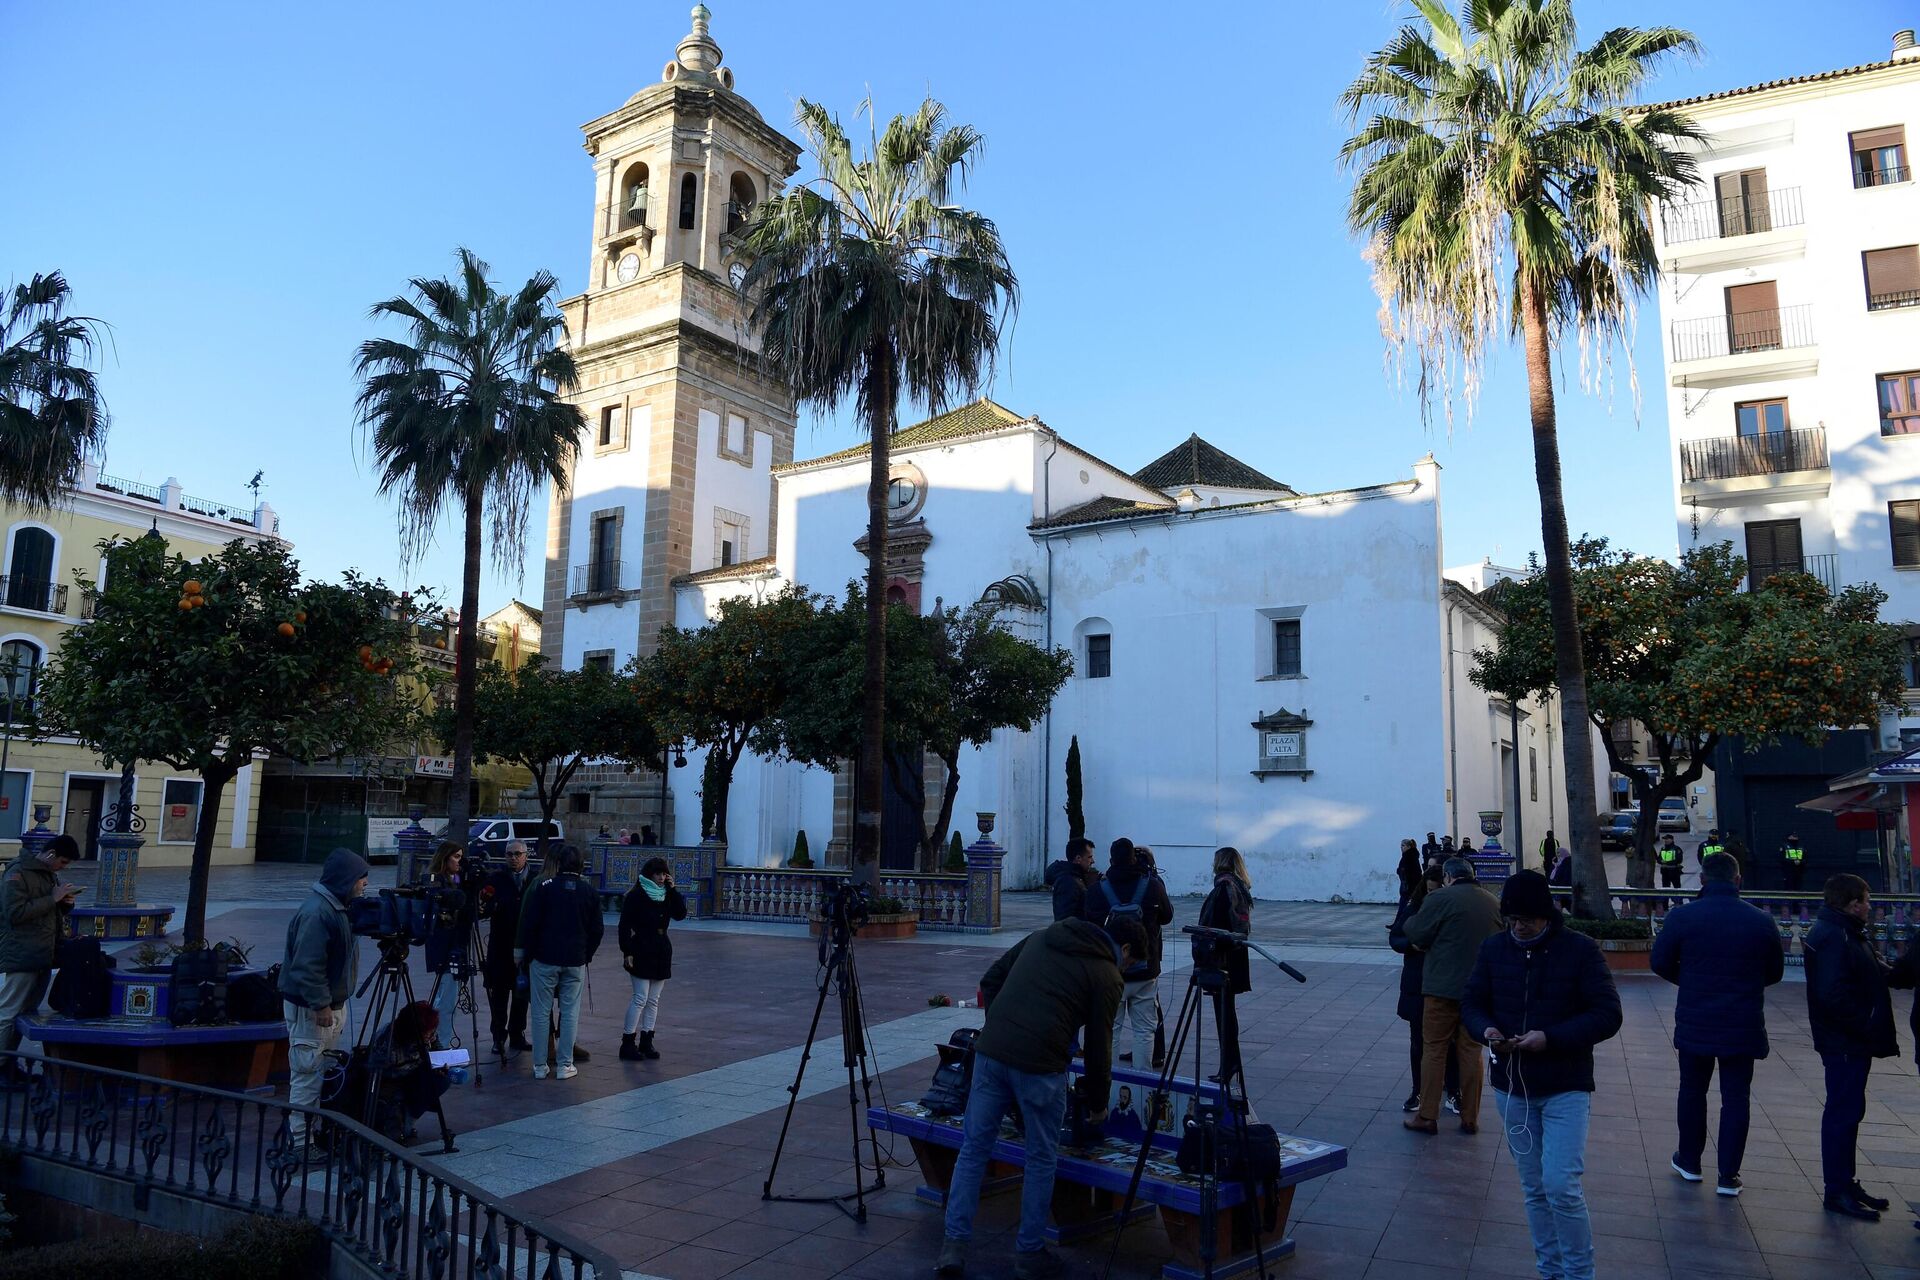 Journalists stand on the square in front of the church where a man was killed the day before in Algeciras, southern Spain, on January 26, 2023 - Sputnik International, 1920, 26.01.2023